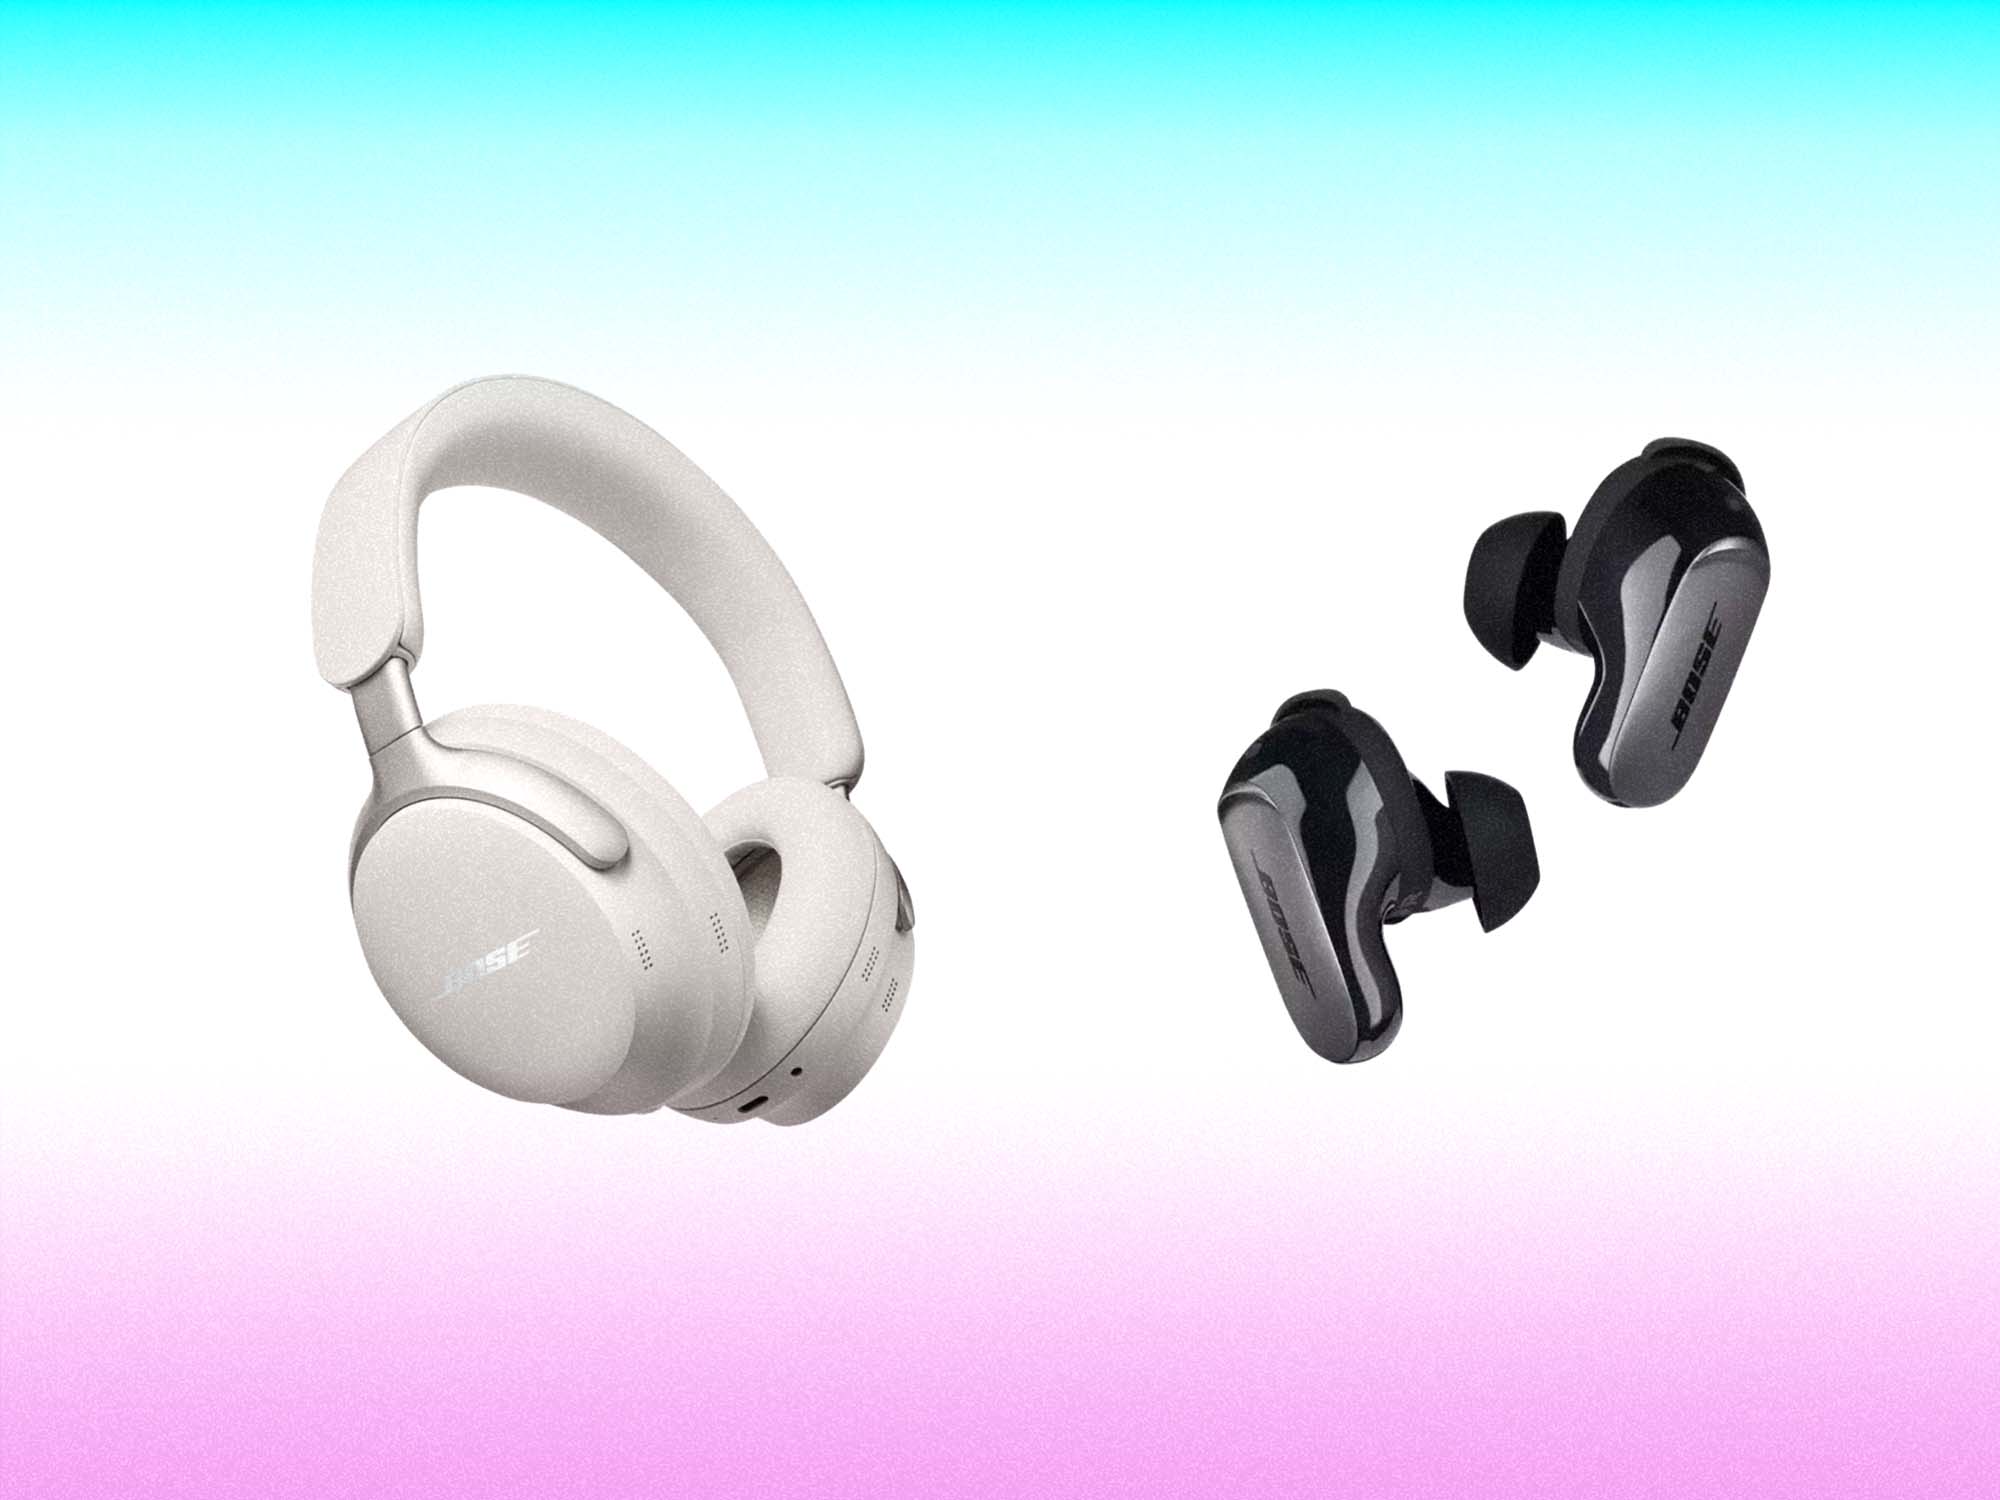 The QuietComfort headphones in White Smoke and the earbuds in Black